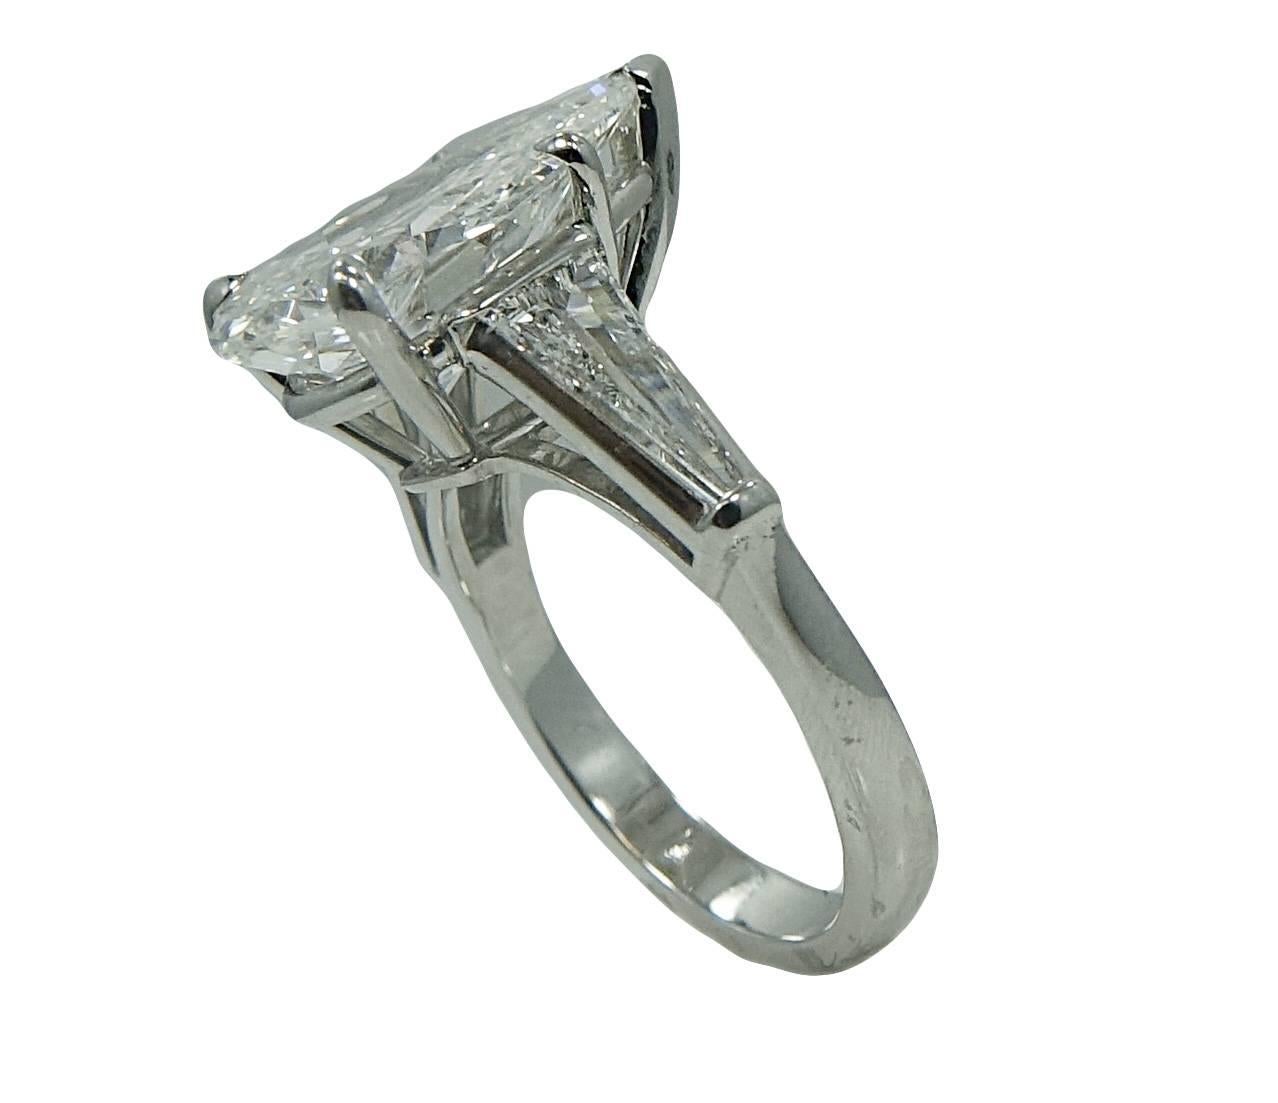  5.04 Carat Pear Shaped Diamond Platinum Engagement Ring In Excellent Condition For Sale In Naples, FL